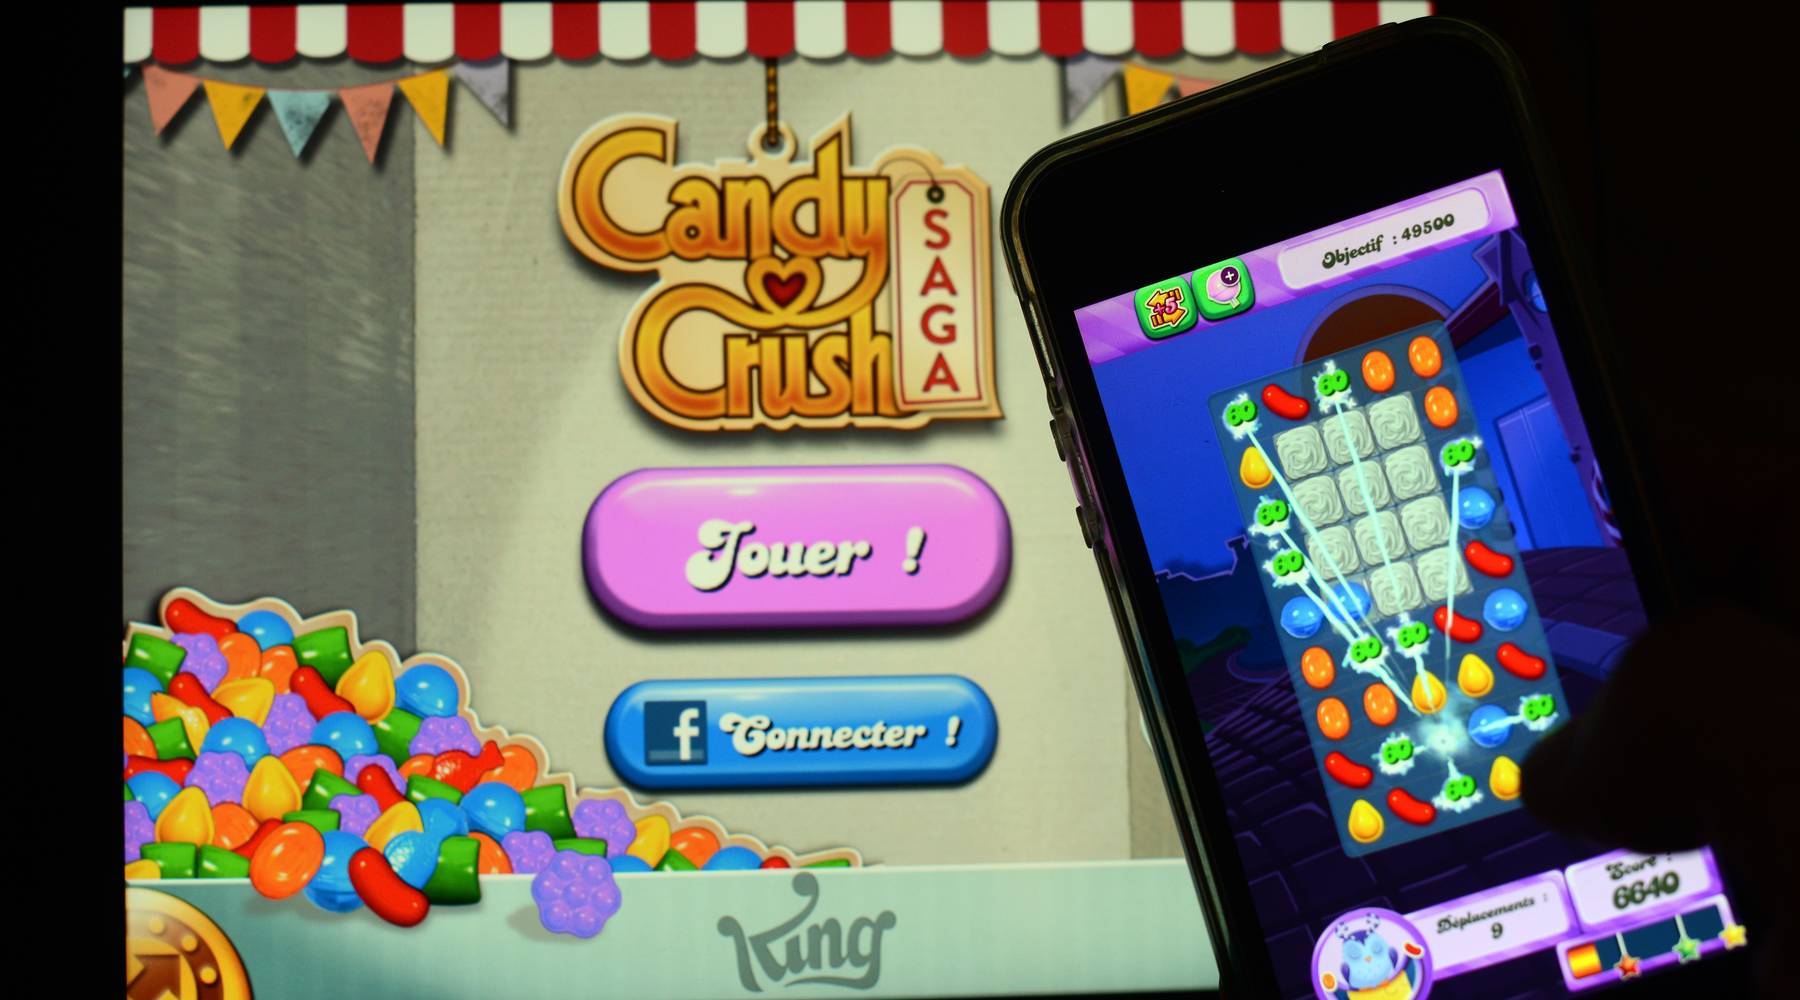 Candy Crush Comes Back to Facebook with a New Title